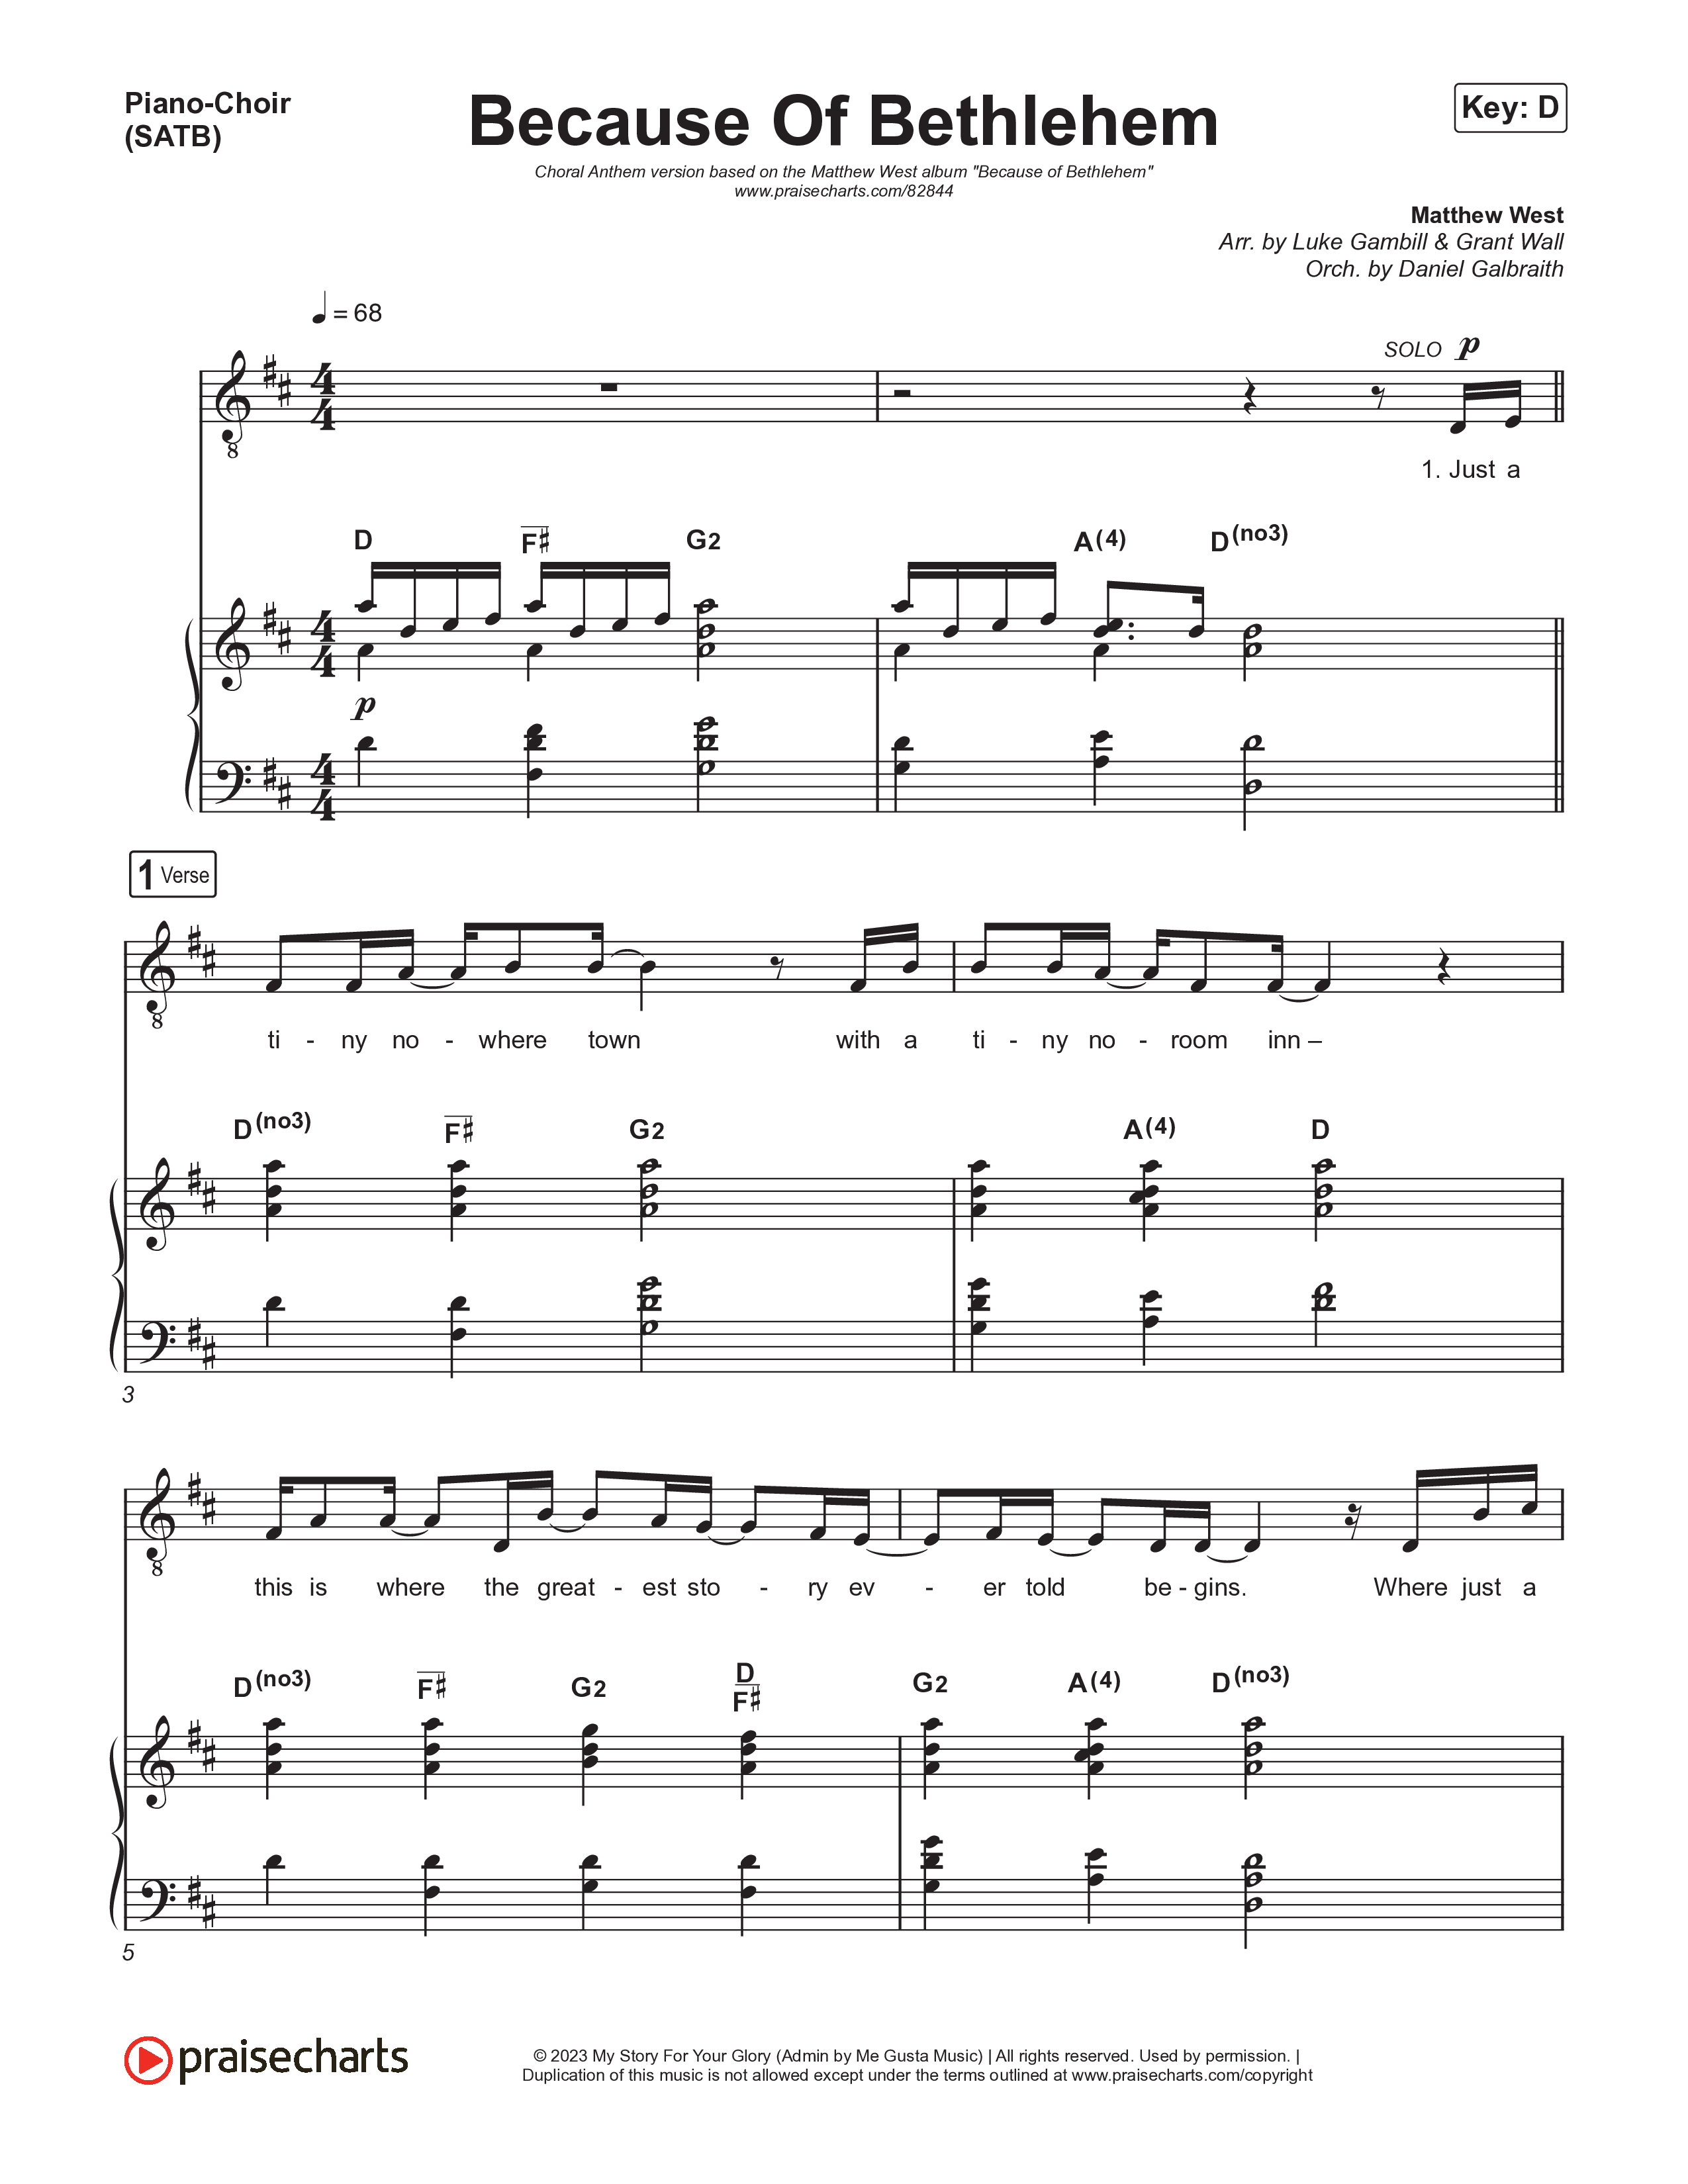 Because Of Bethlehem (Choral Anthem SATB) Piano/Vocal (SATB) (Matthew West / Arr. Luke Gambill)